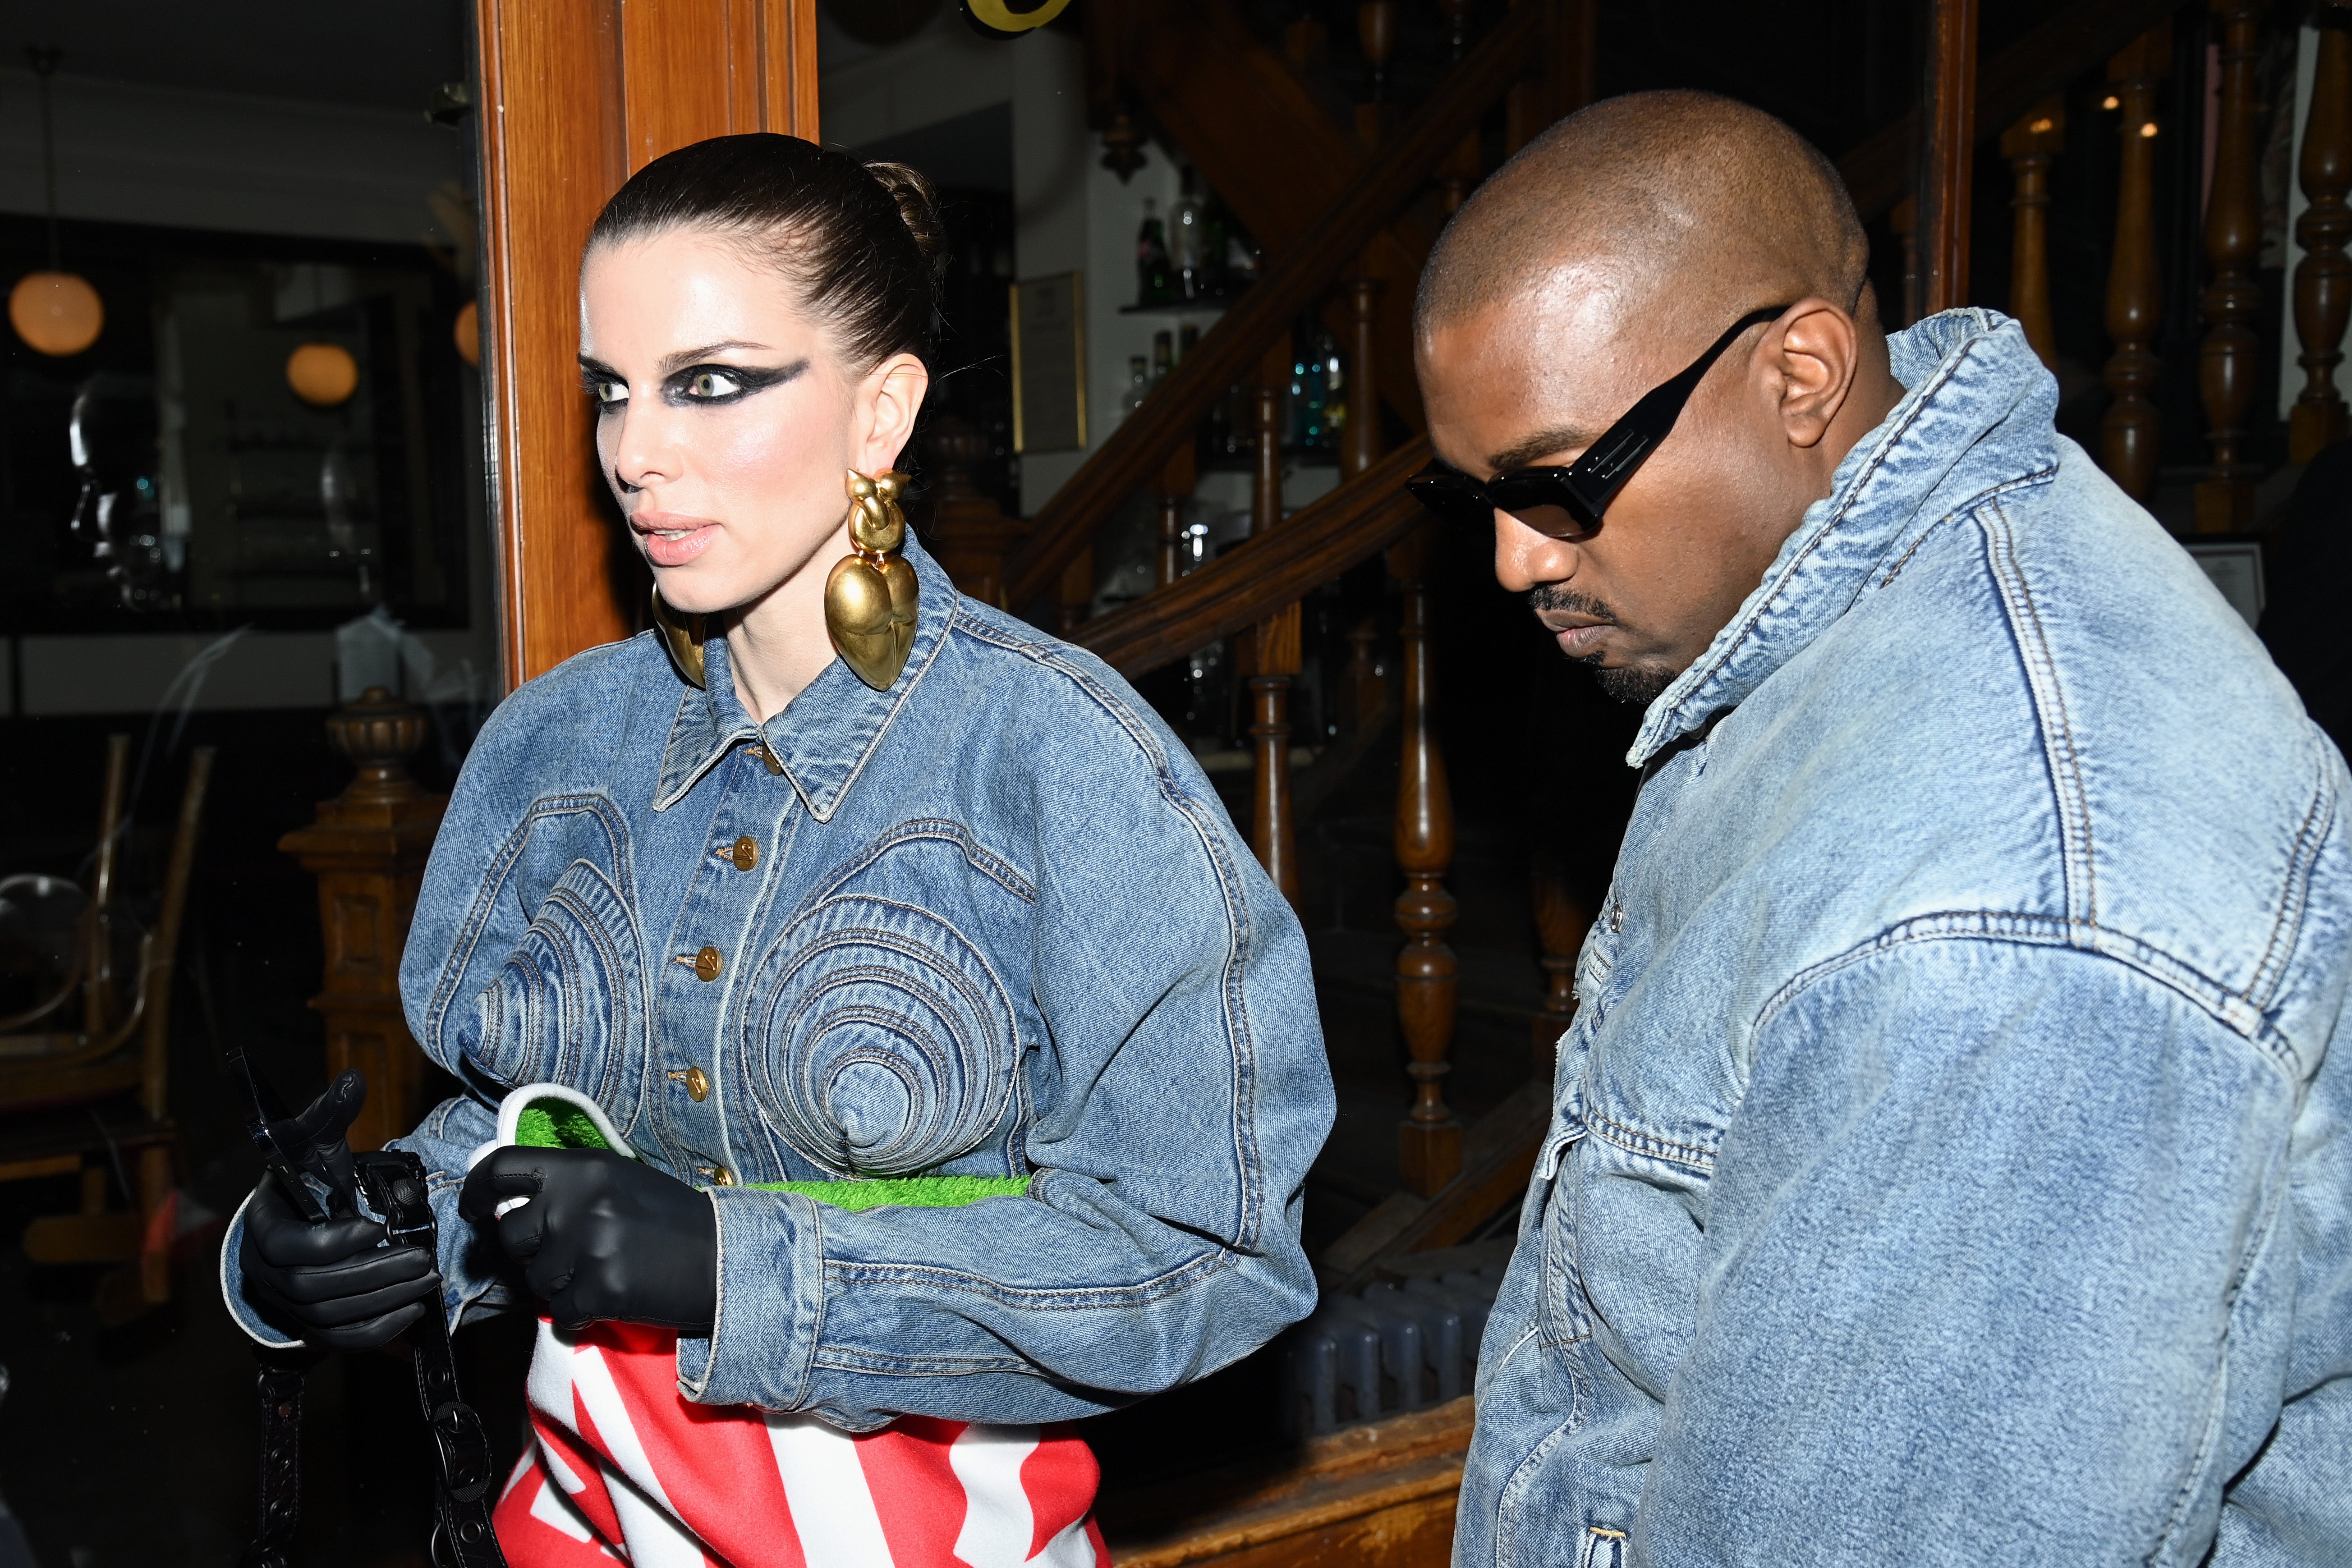 Julia Fox and Kanye West attend Paris Fashion Week in January 2022